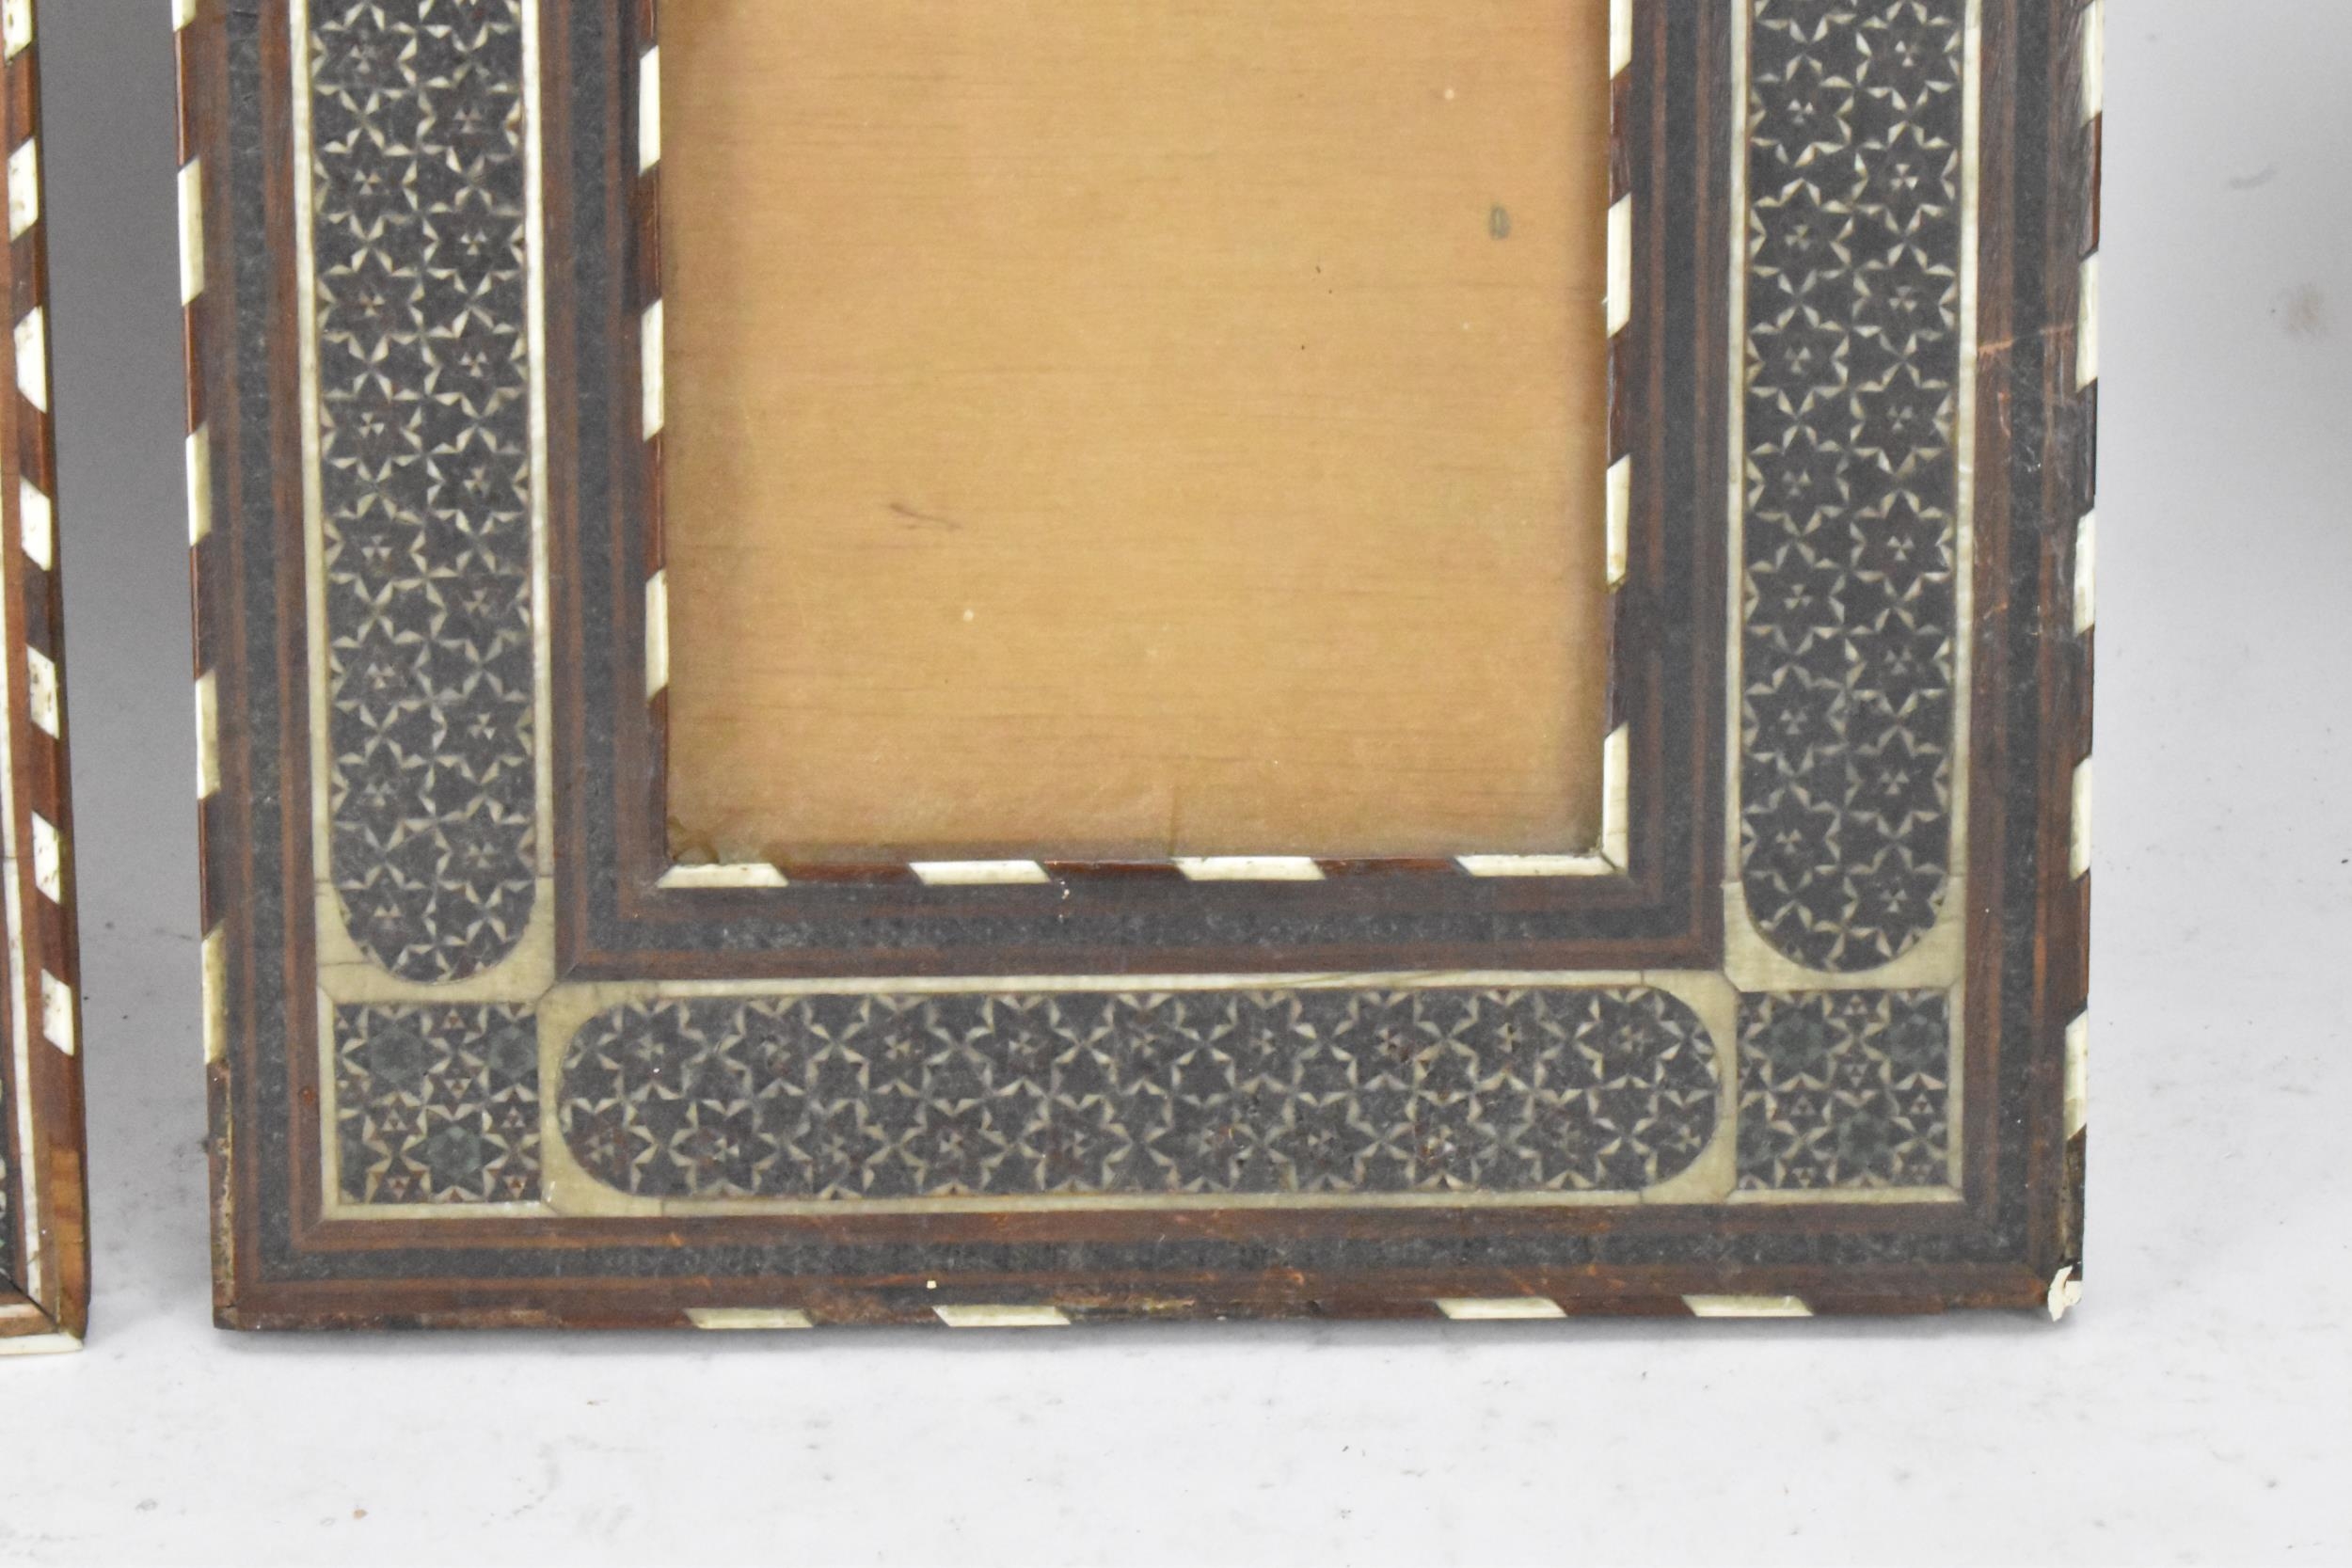 Three similar Persian late Qajar dynasty photograph frames, the profusely inlaid frames having - Image 5 of 14